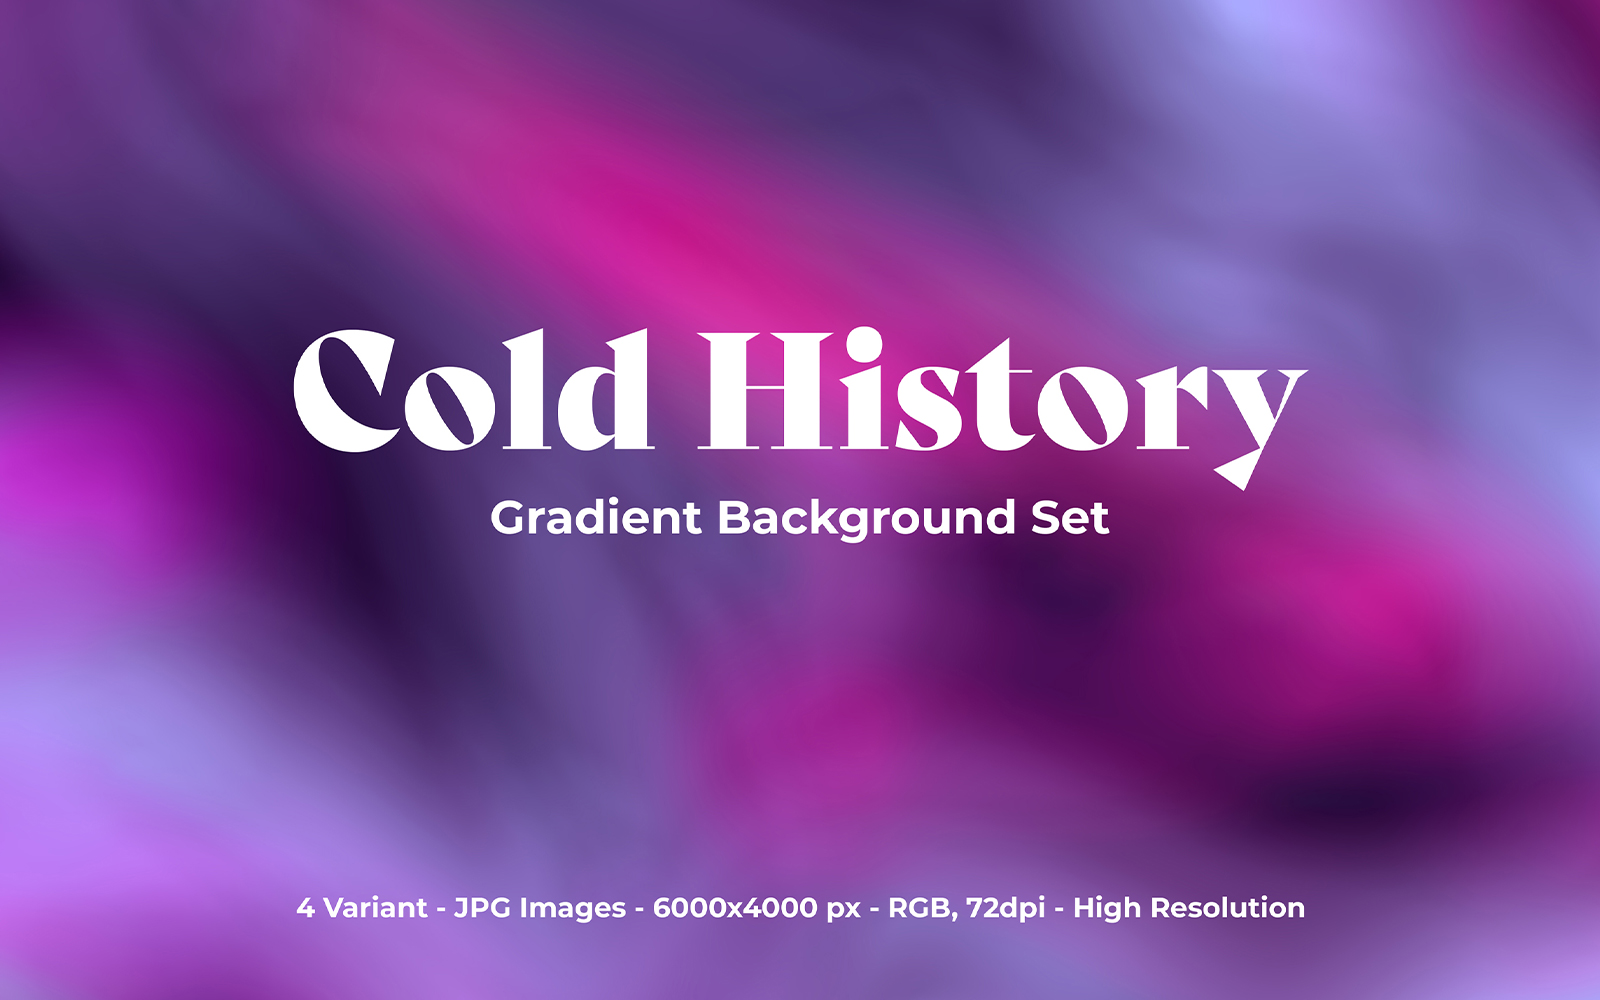 Cold History Gradient Background